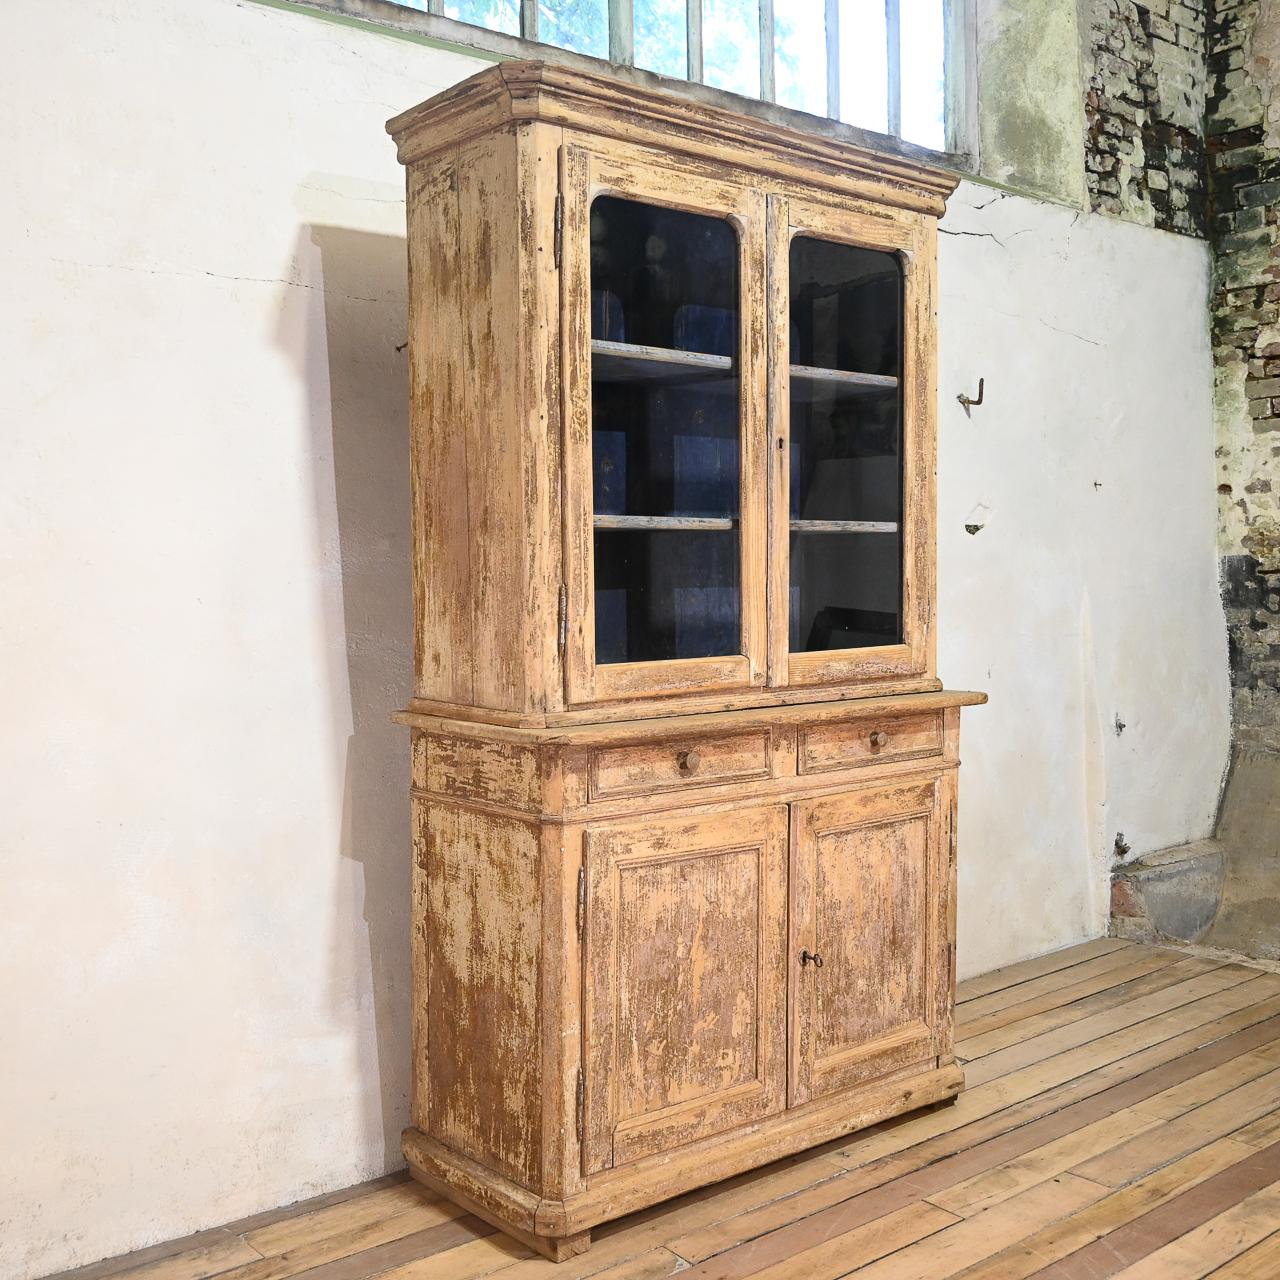 Introducing a remarkable mid-19th century French glazed cabinet, showcasing timeless elegance and vintage charm. This exquisite piece features a pair of glazed doors that enclose a shelved interior, providing ample space for displaying treasured